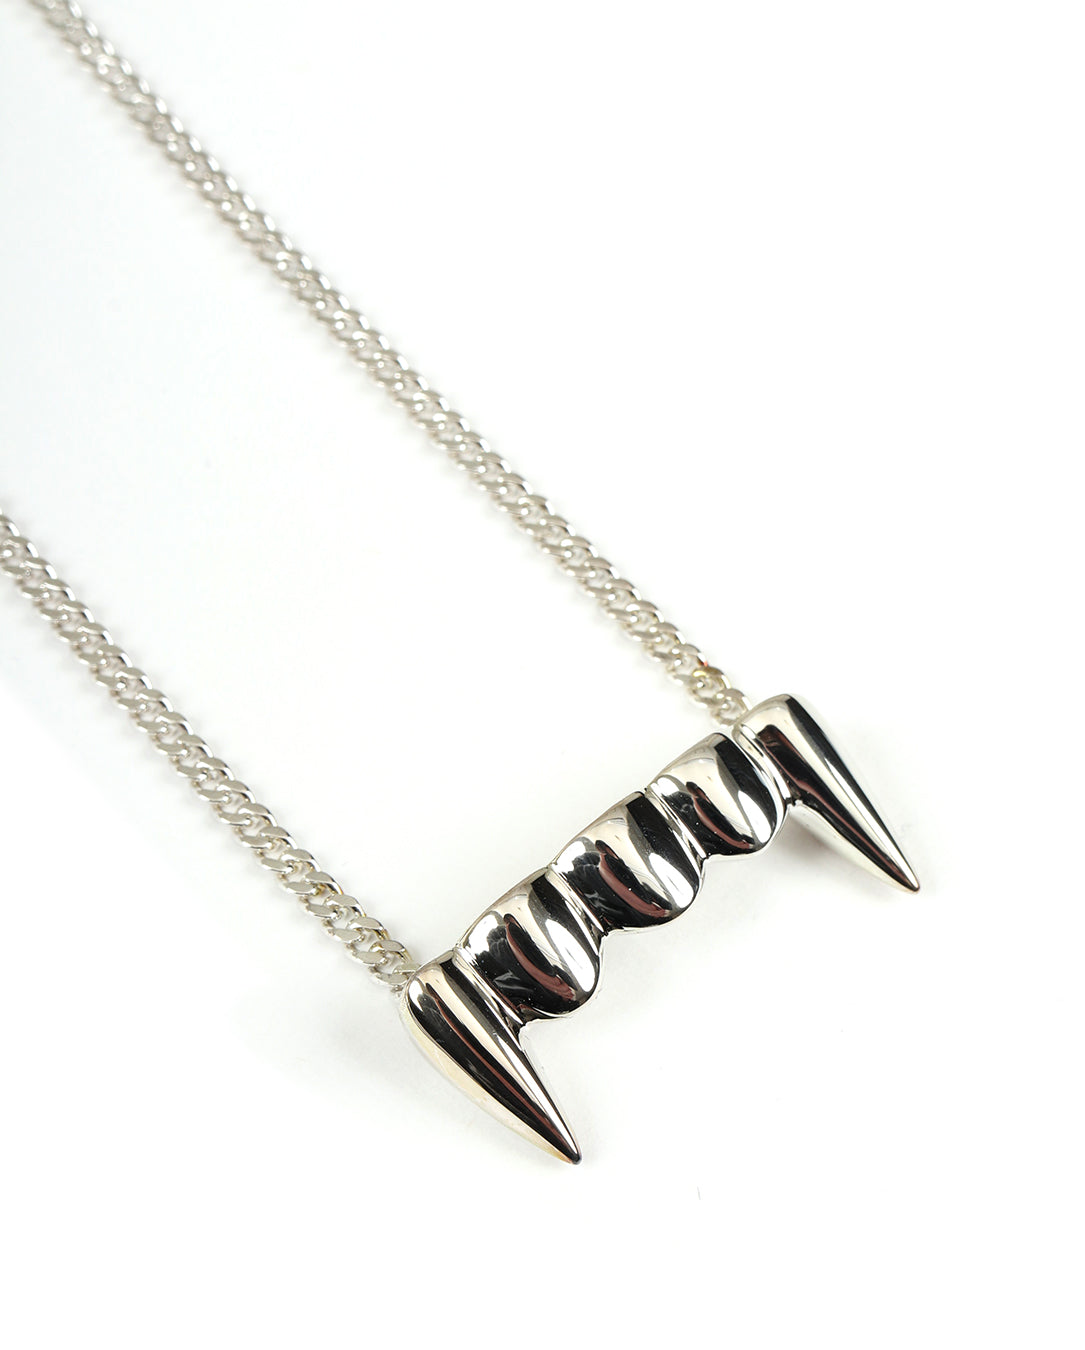 Floating Fang Necklace